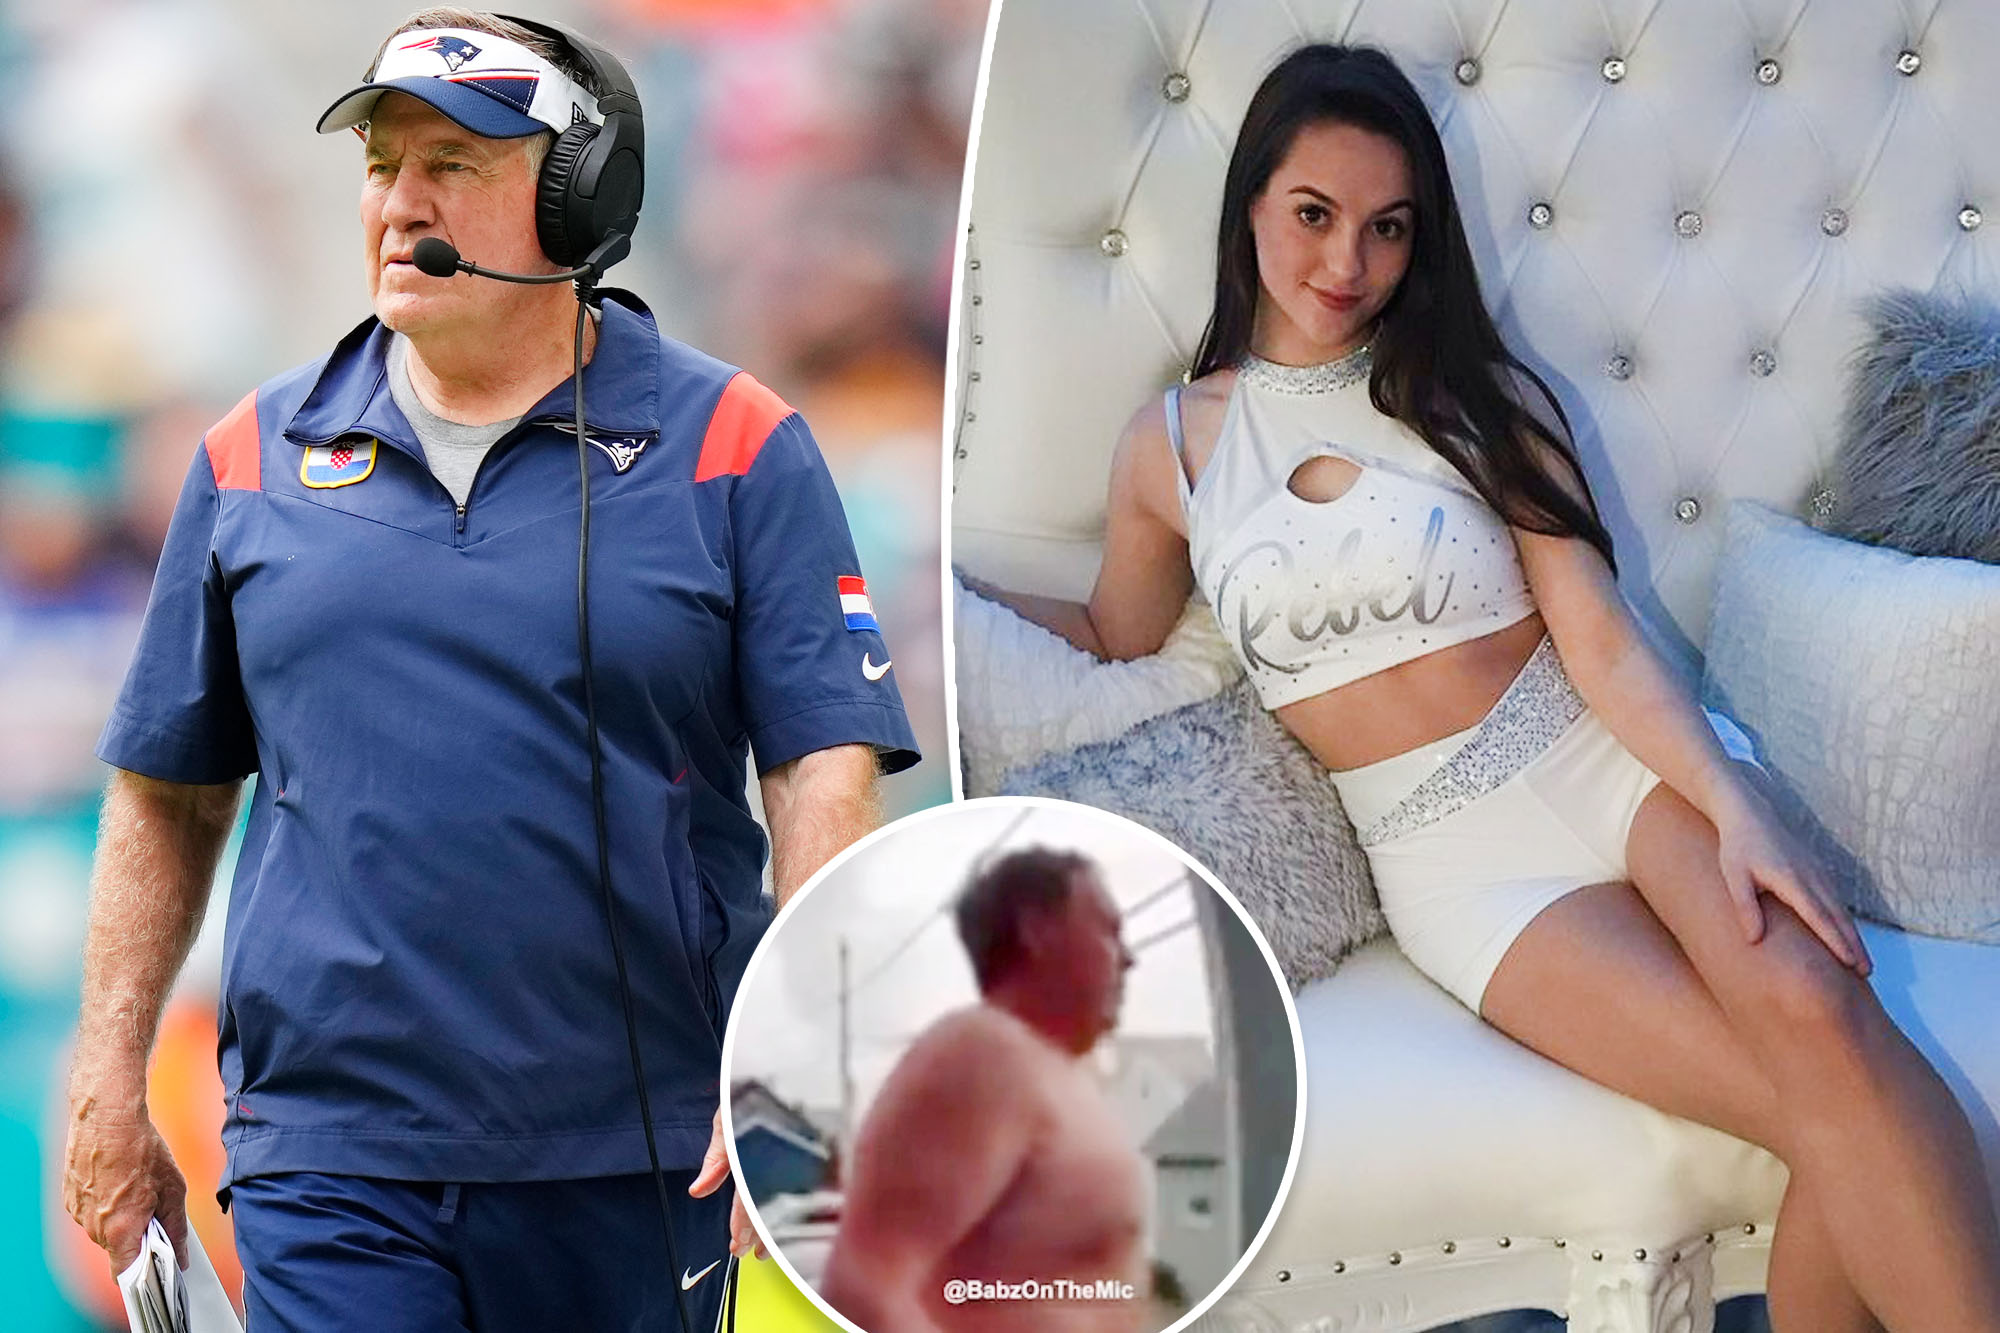 Shirtless Bill Belichick's Early Morning Exit: A Closer Look at His Rumored Romance